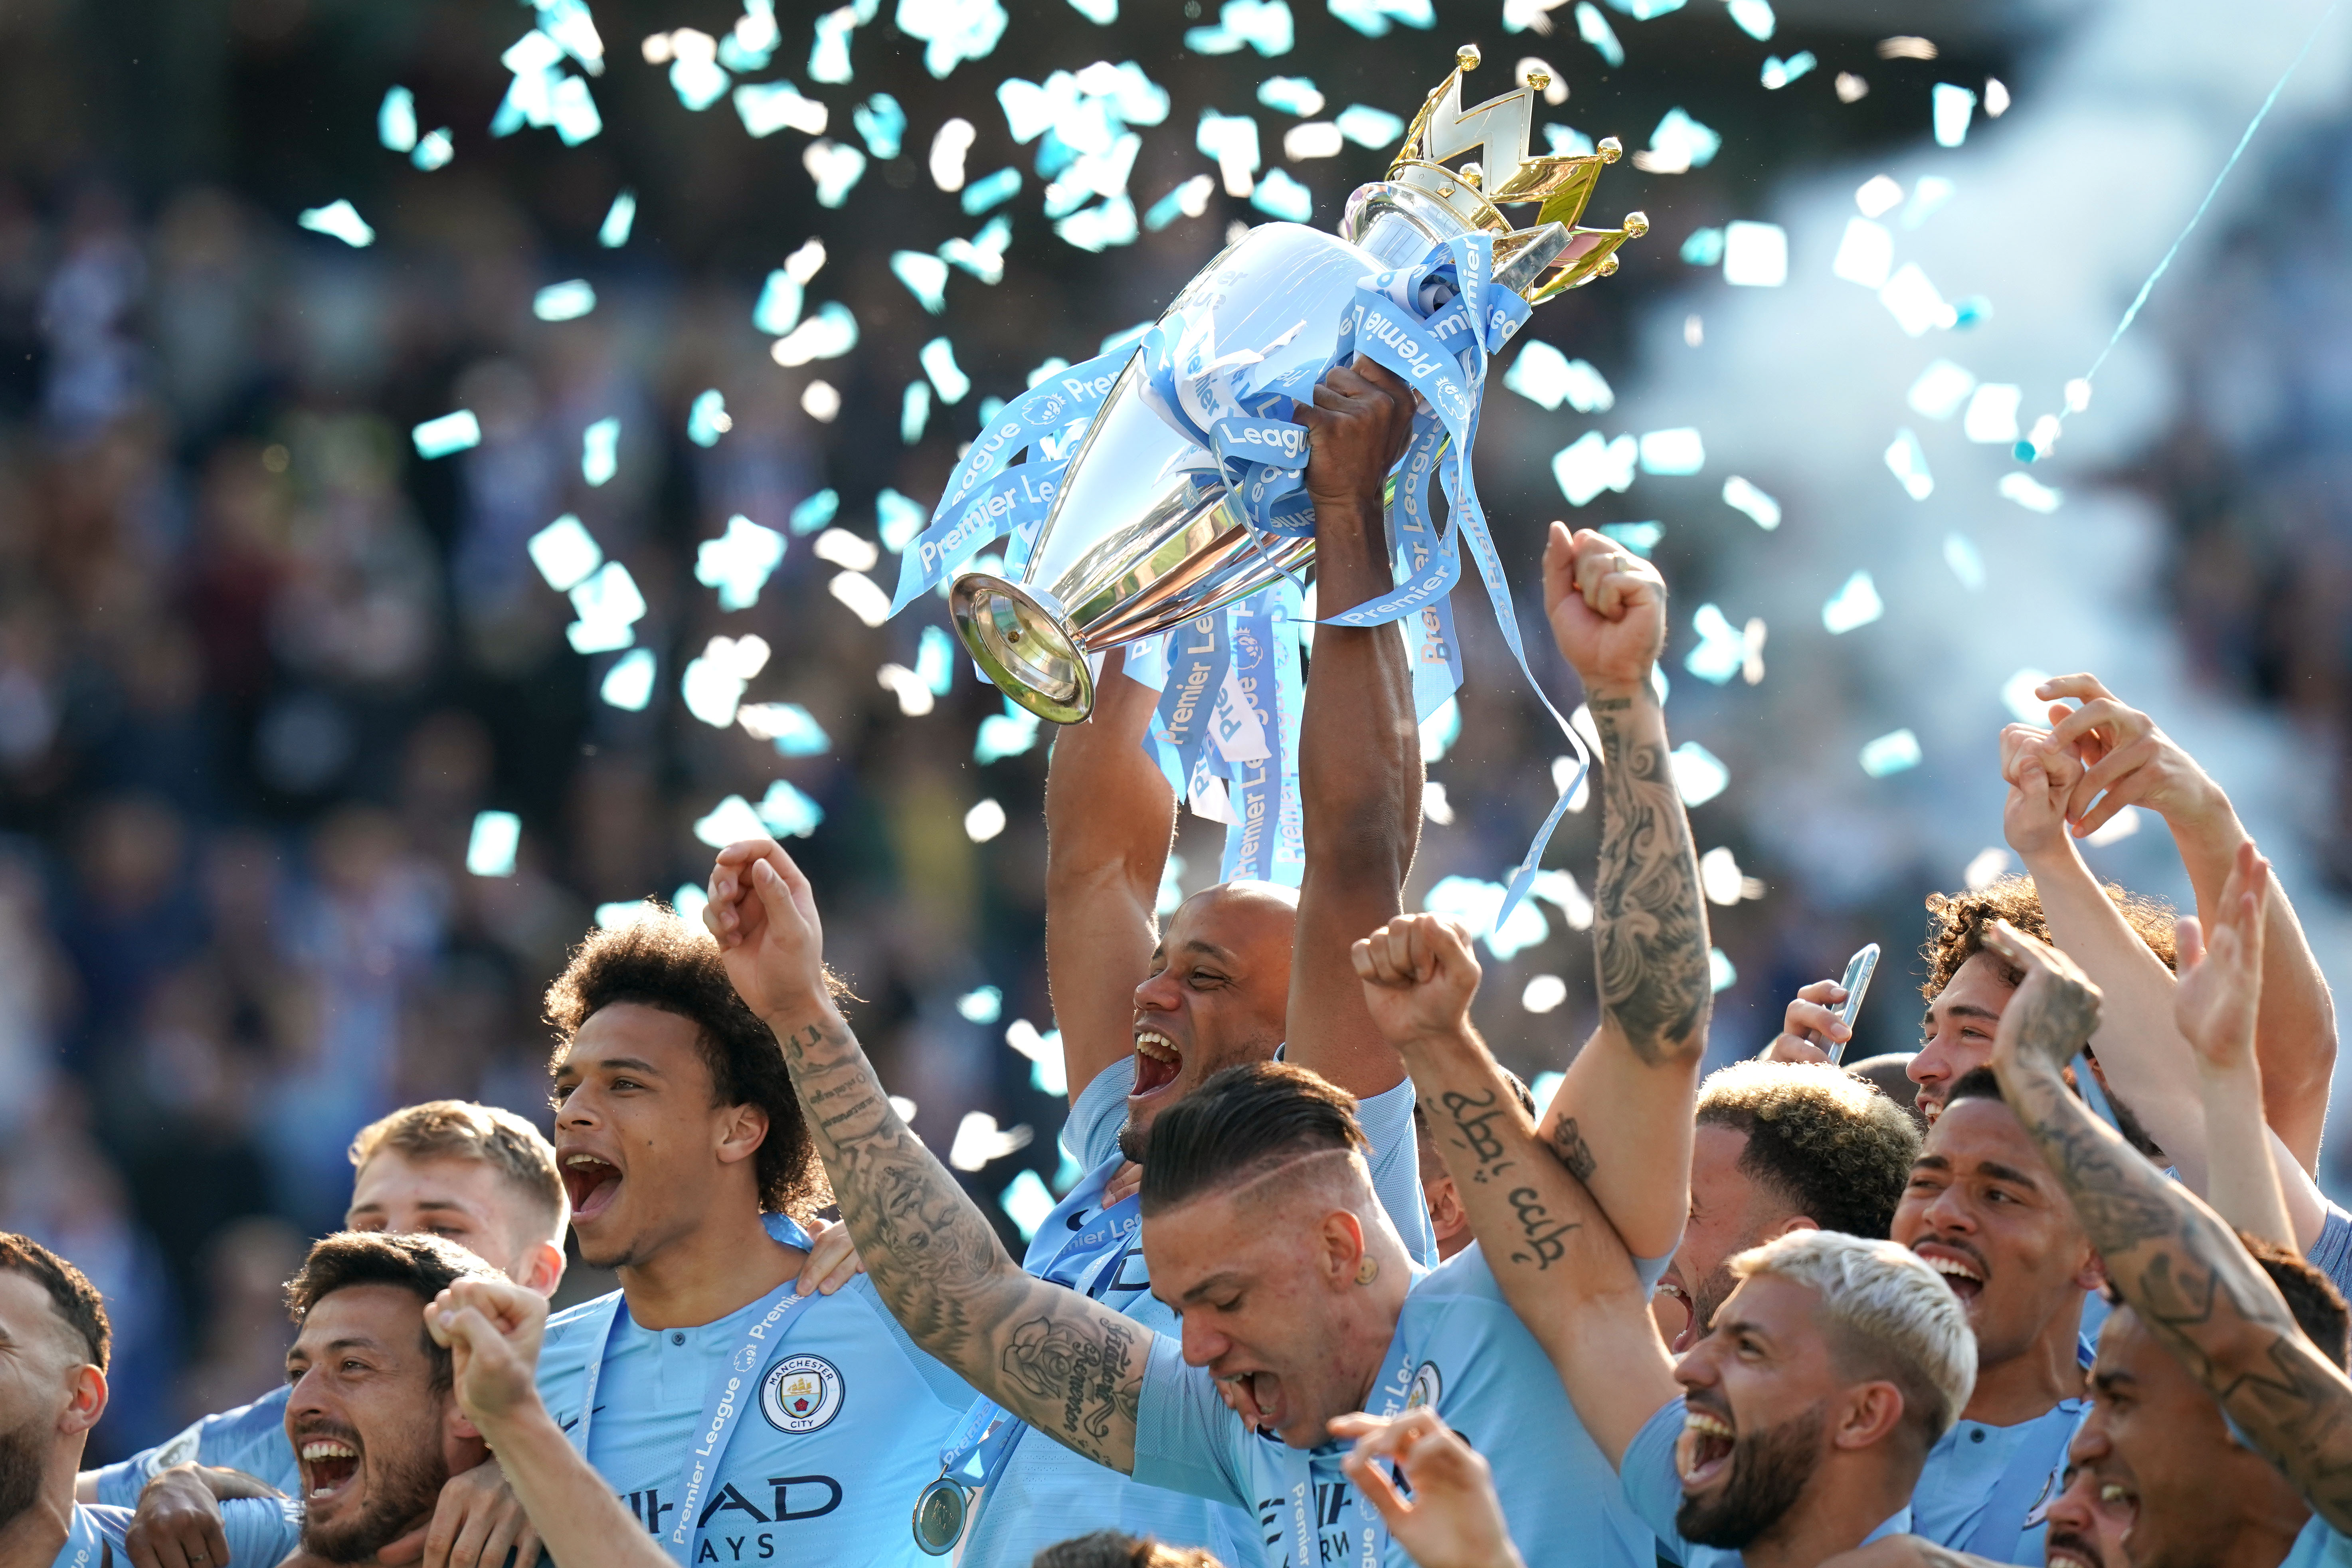 Manchester City captain Vincent Kompany lifts the Premier League trophy at Brighton in May at the end of a thrilling title race. Pep Guardiola's side retained their crown after coming from a goal down to win 4-1 at the Amex Stadium and finish a single point ahead of rivals Liverpool